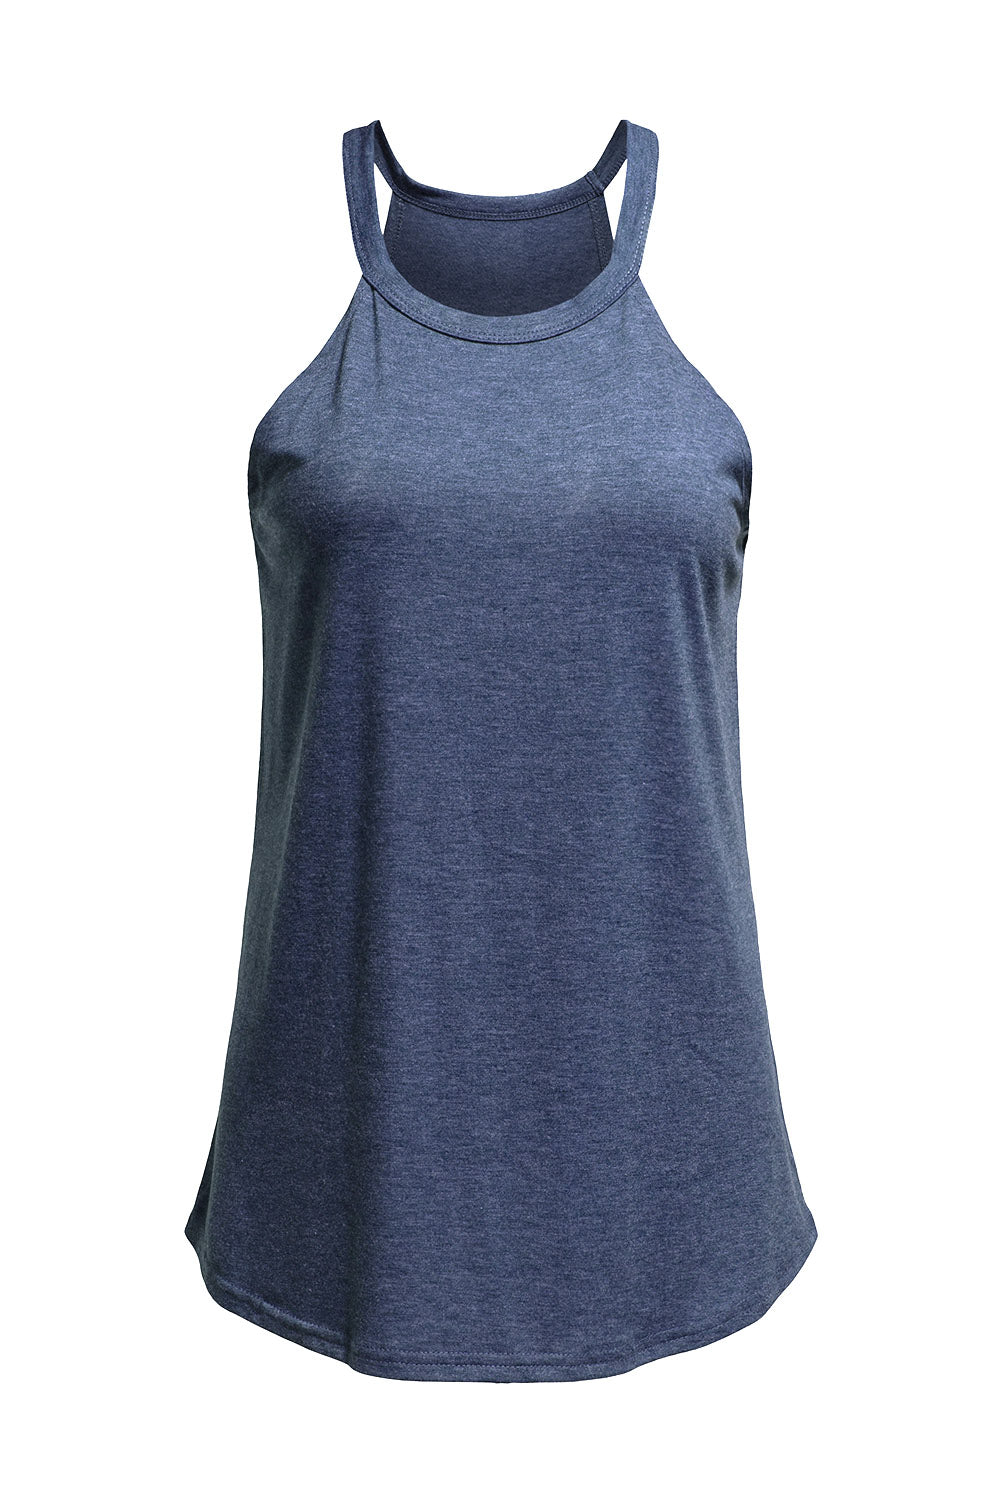 Green Solid Color Crew Neck Tank Top